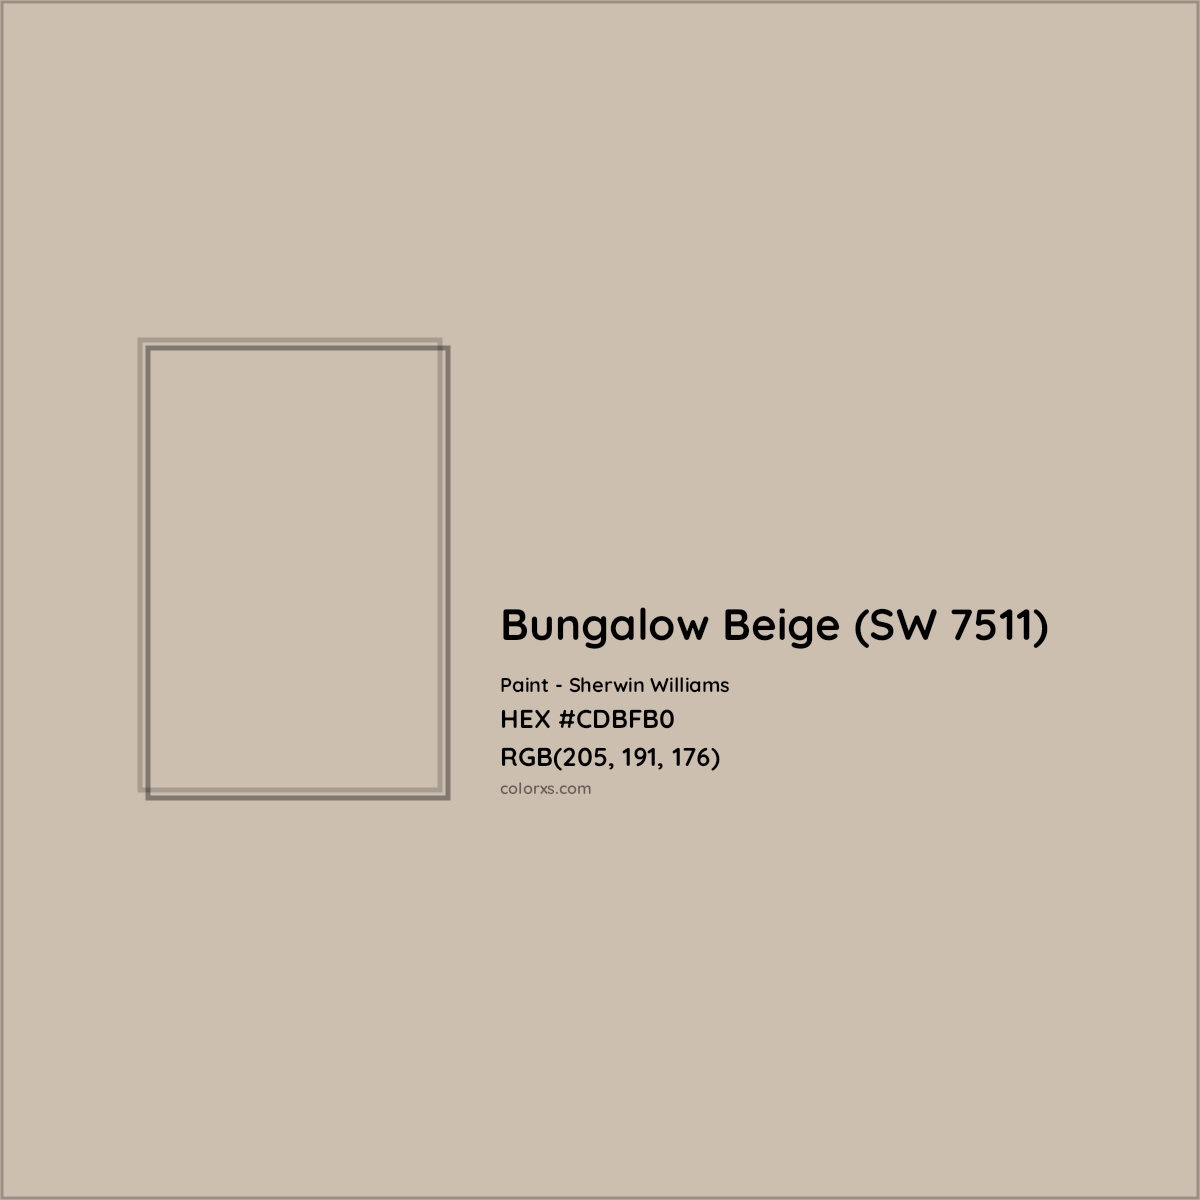 HEX #CDBFB0 Bungalow Beige (SW 7511) Paint Sherwin Williams - Color Code